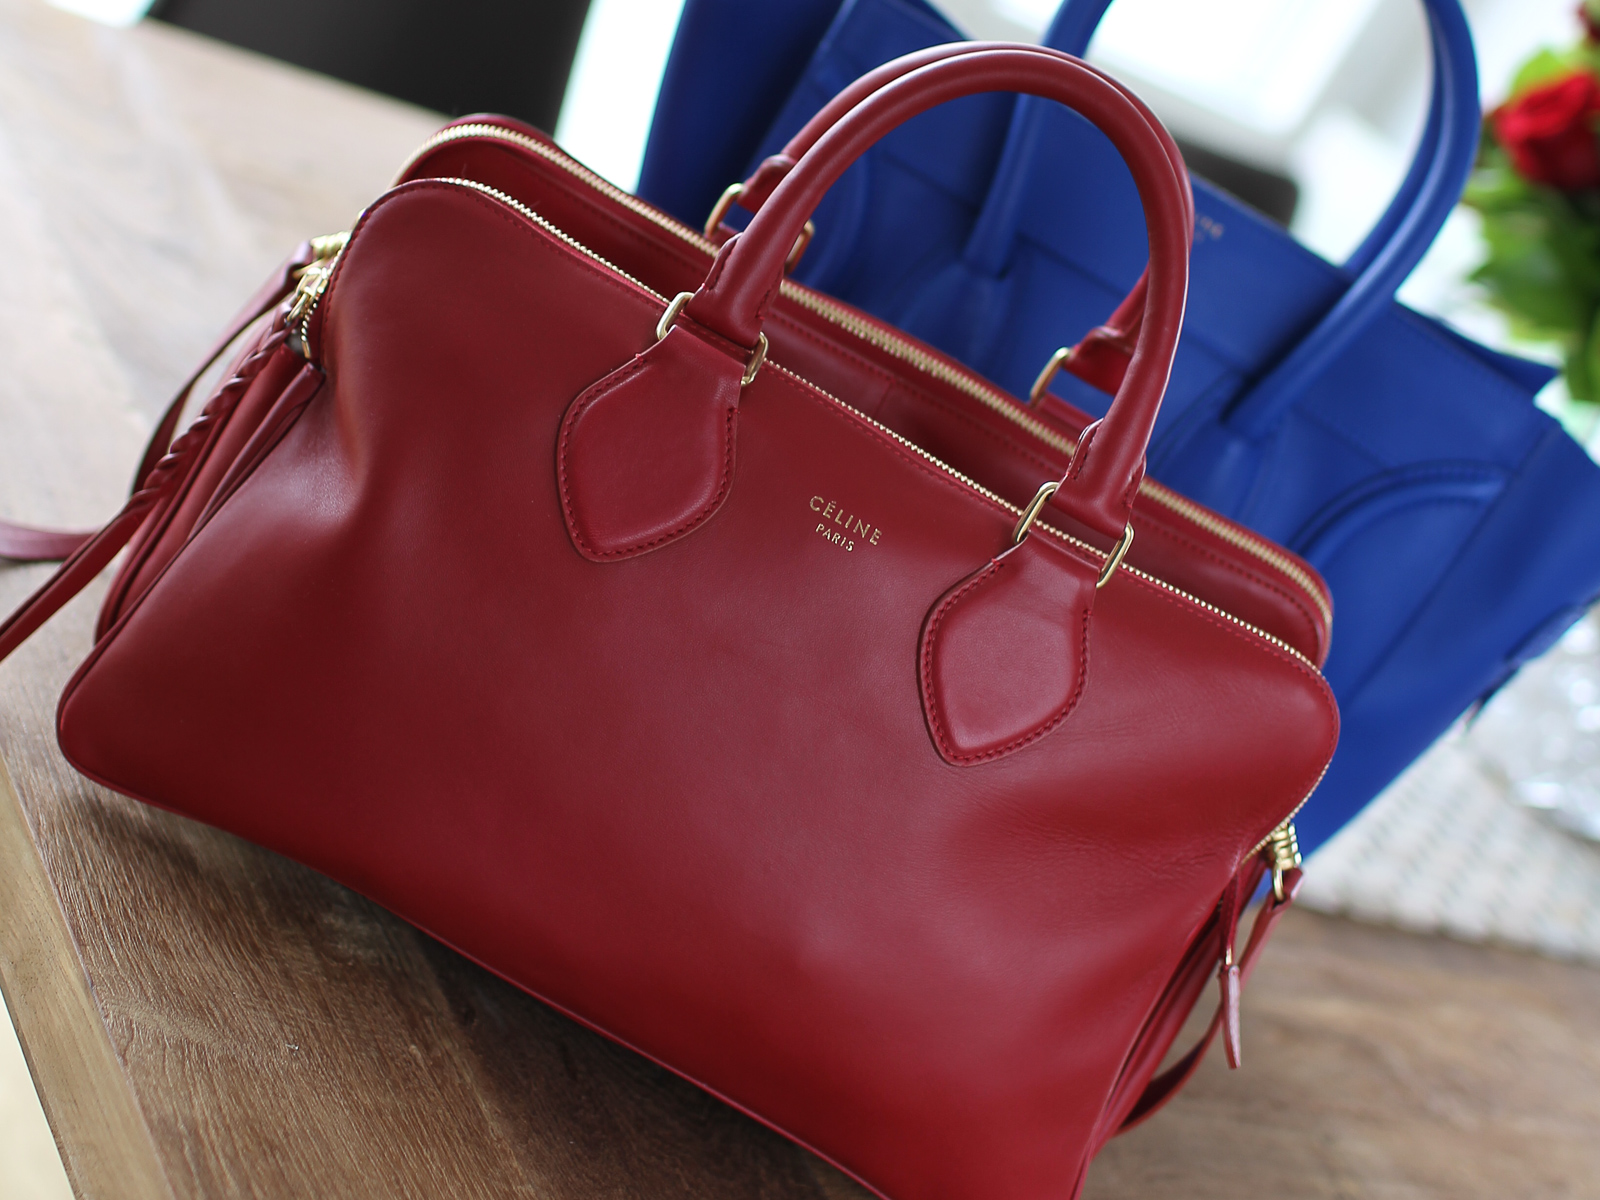 My Celine Bag Collection - A Guide to Celine's Classic Bags